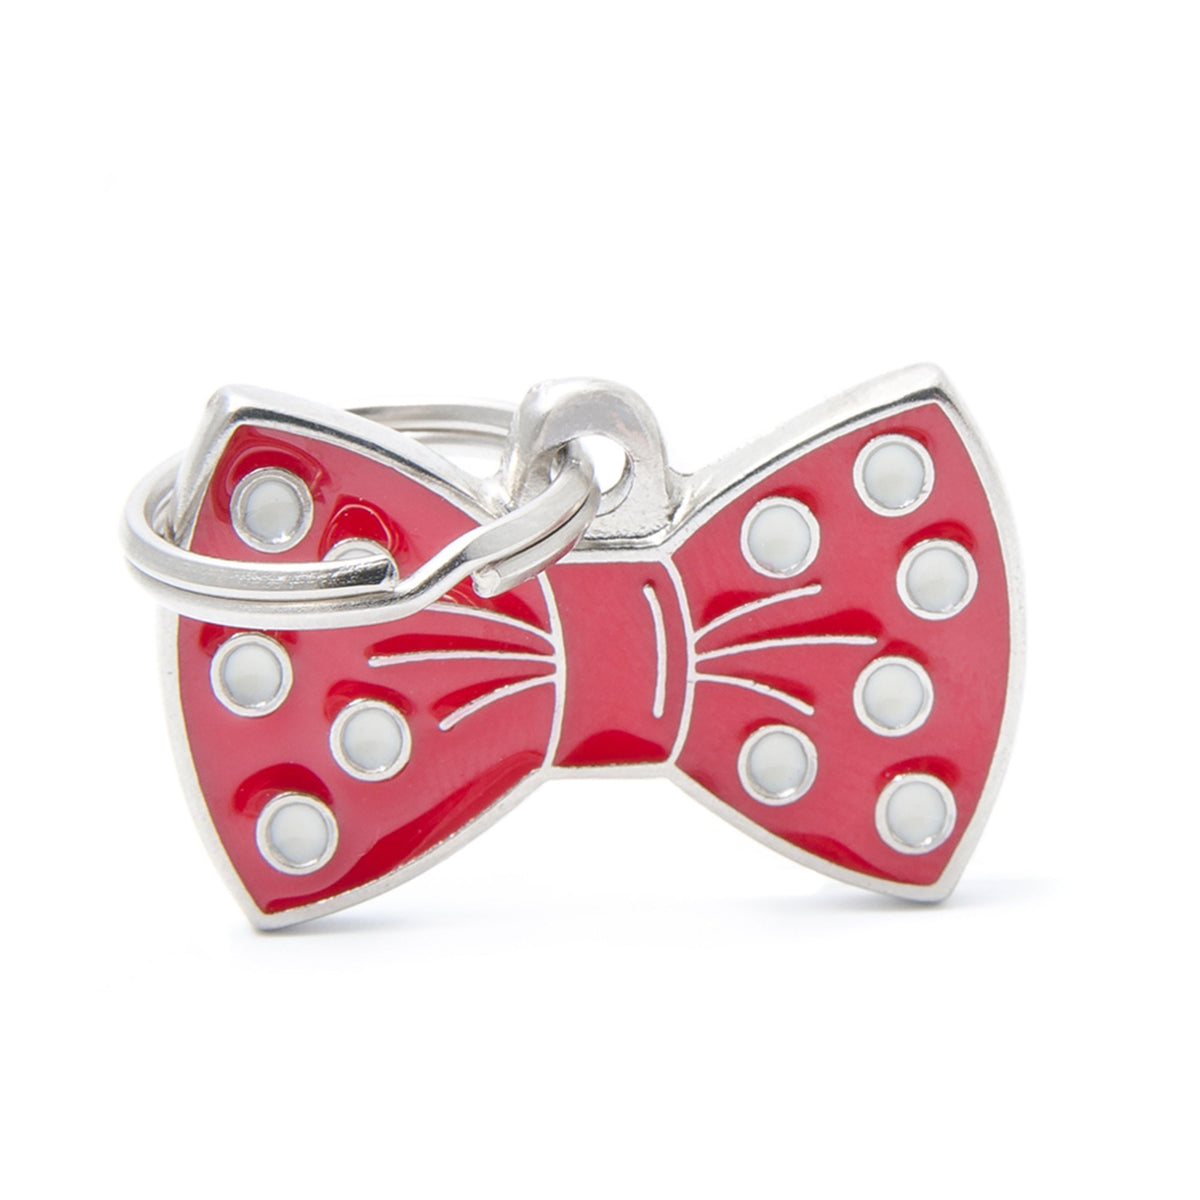 My Family Charms Red Bow Tie I.D. TAG